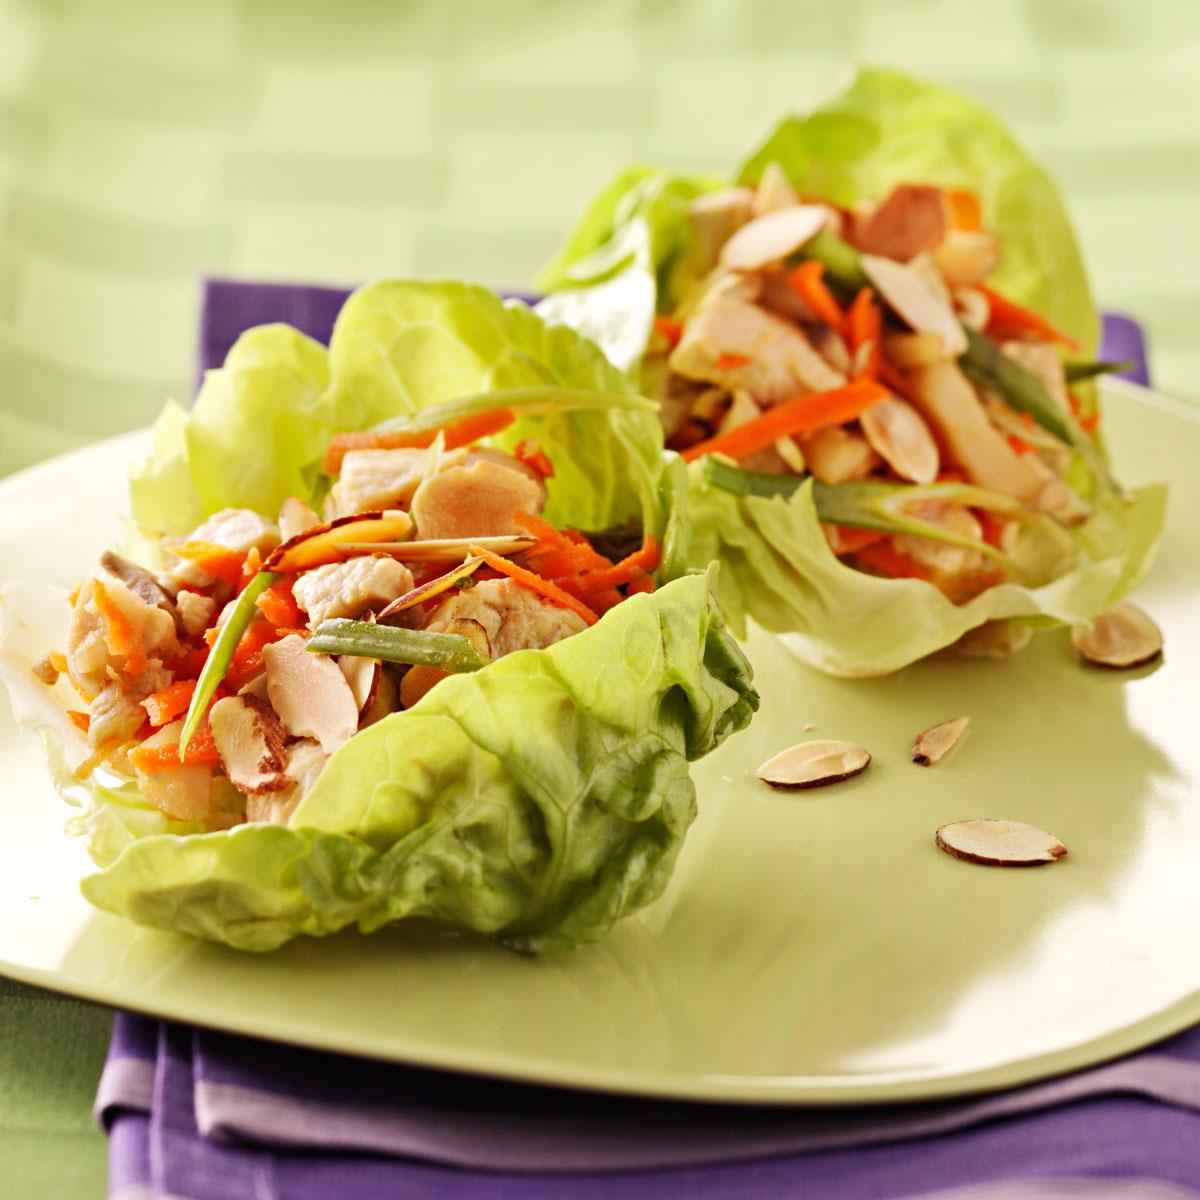 Chicken Lettuce Wraps Recipe: How to Make It